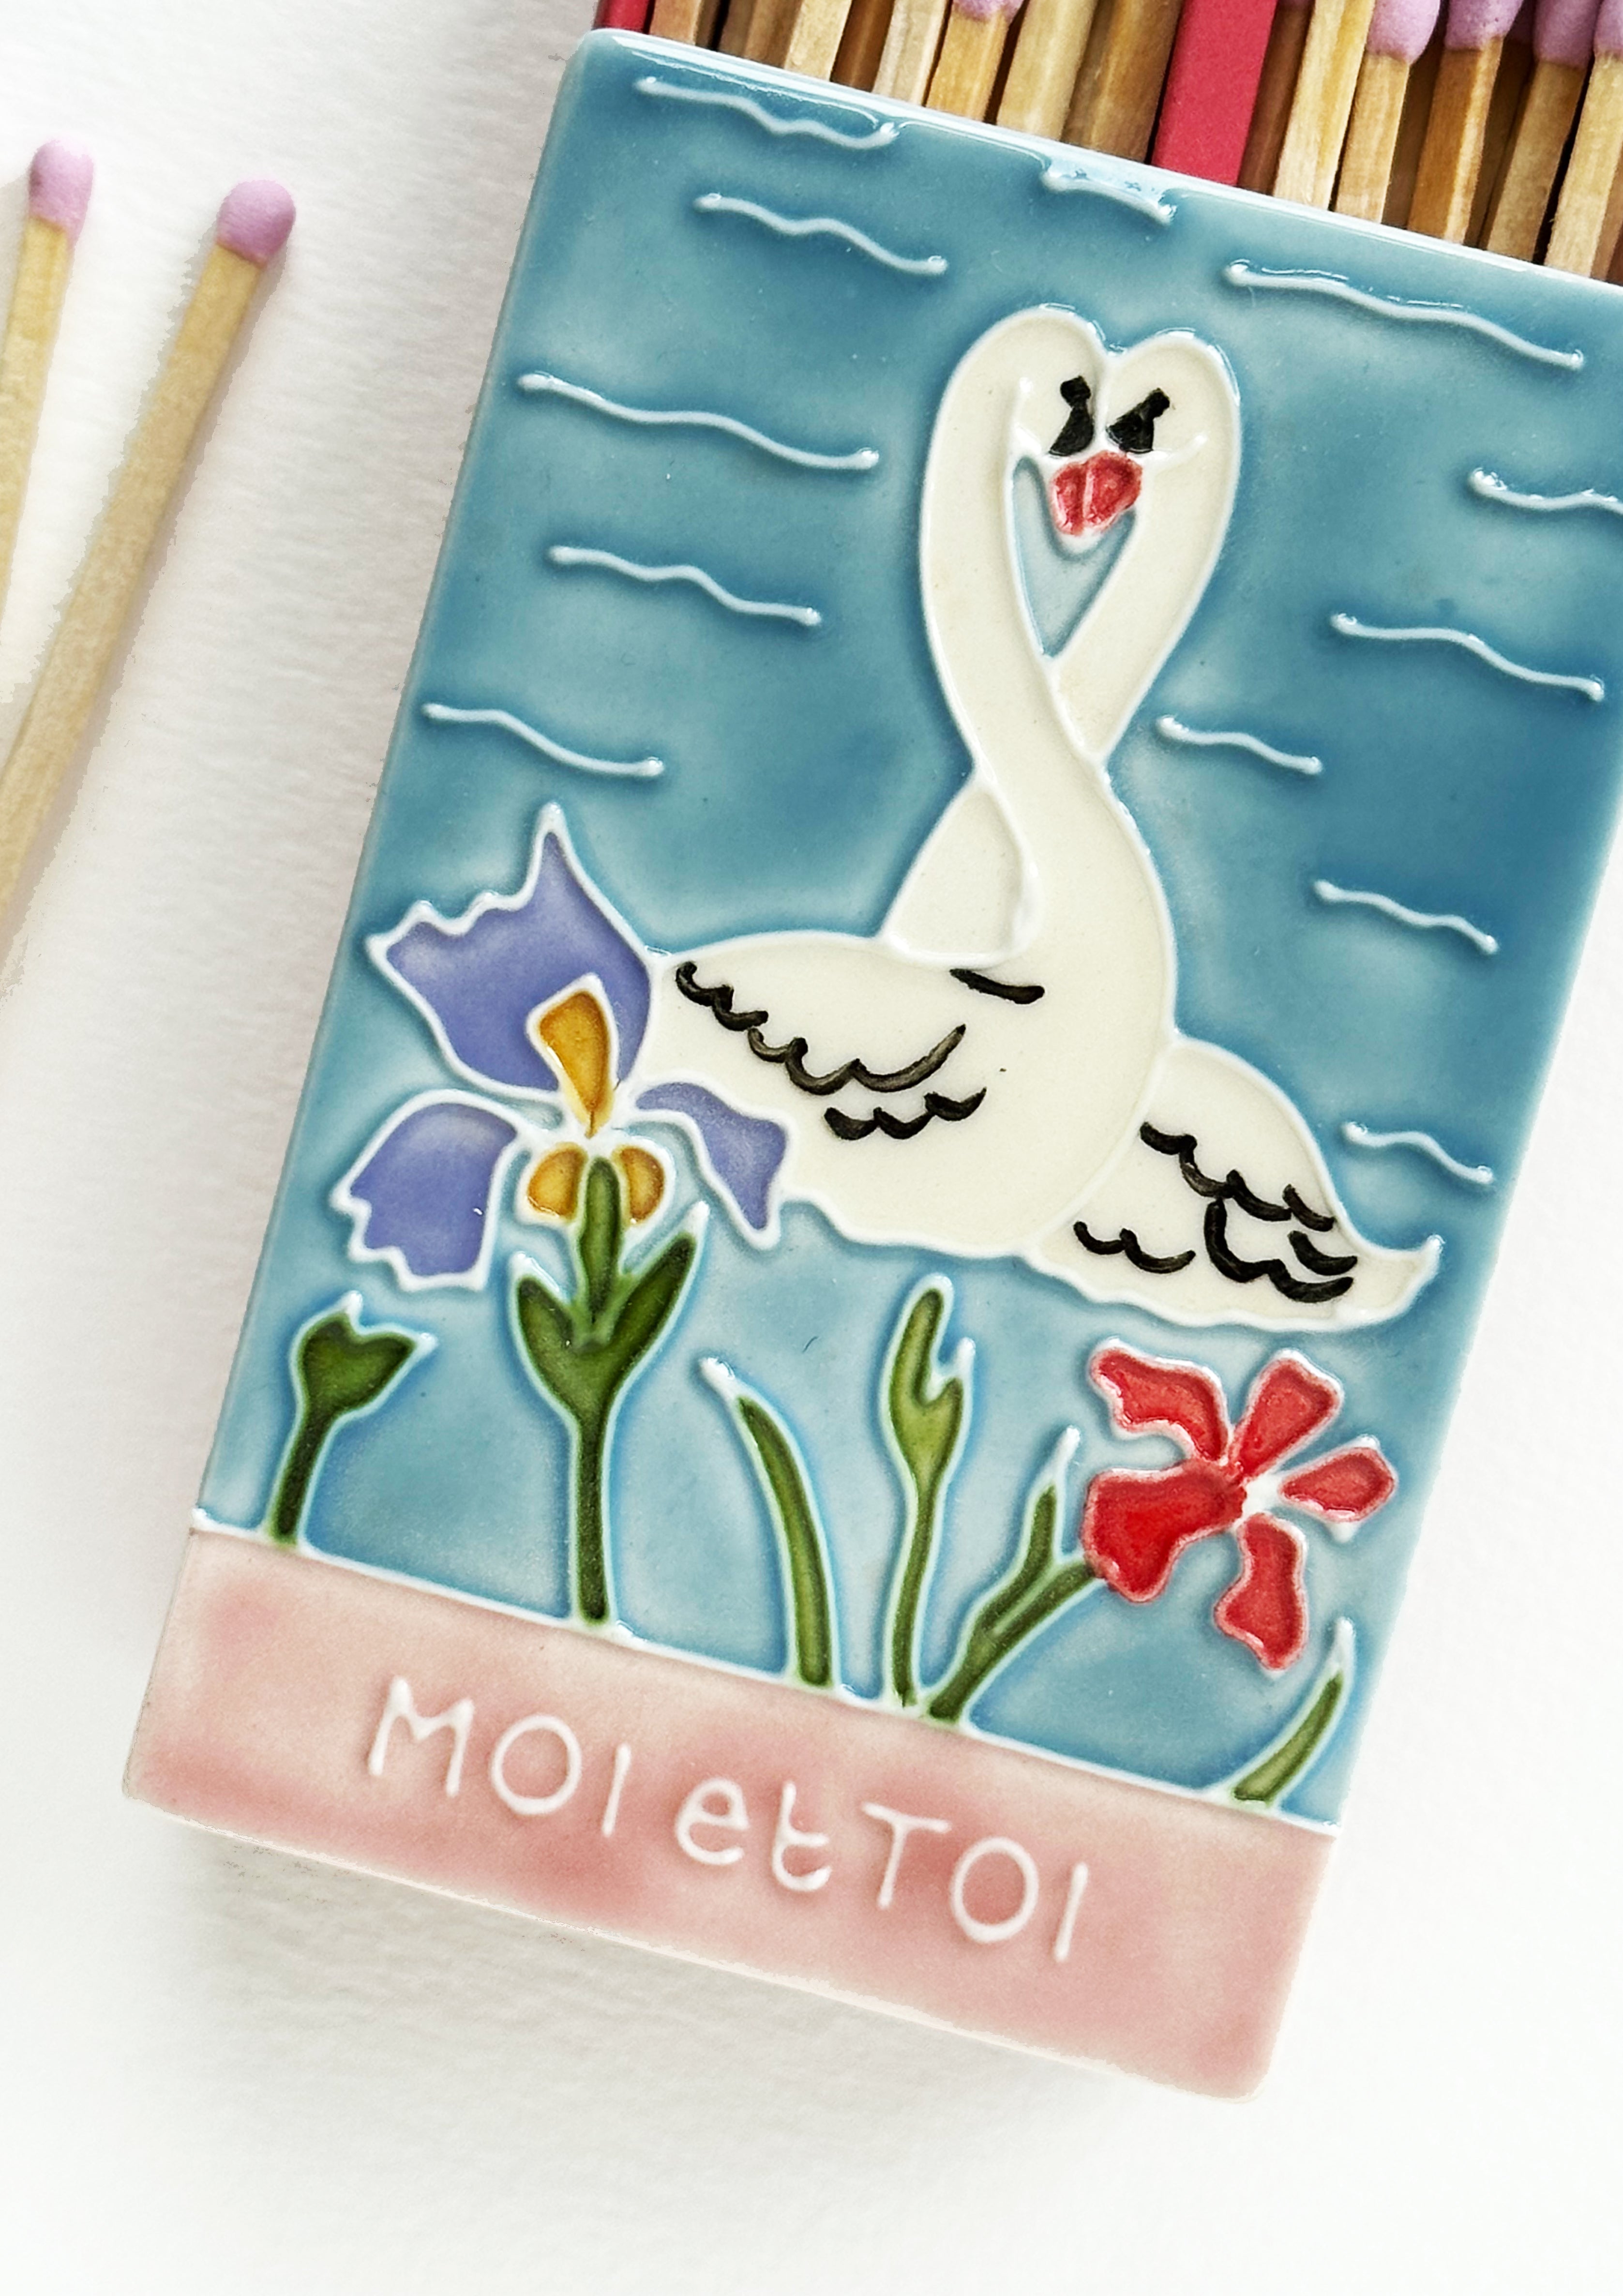 Luxury ceramic 'Moi et Toi' matchbox featuring kissing swans and iris flowers. The ceramic artwork sits atop a luxury card case with striker strip. Each box contains 40 coloured extra long safety matches. Made exclusively in England.